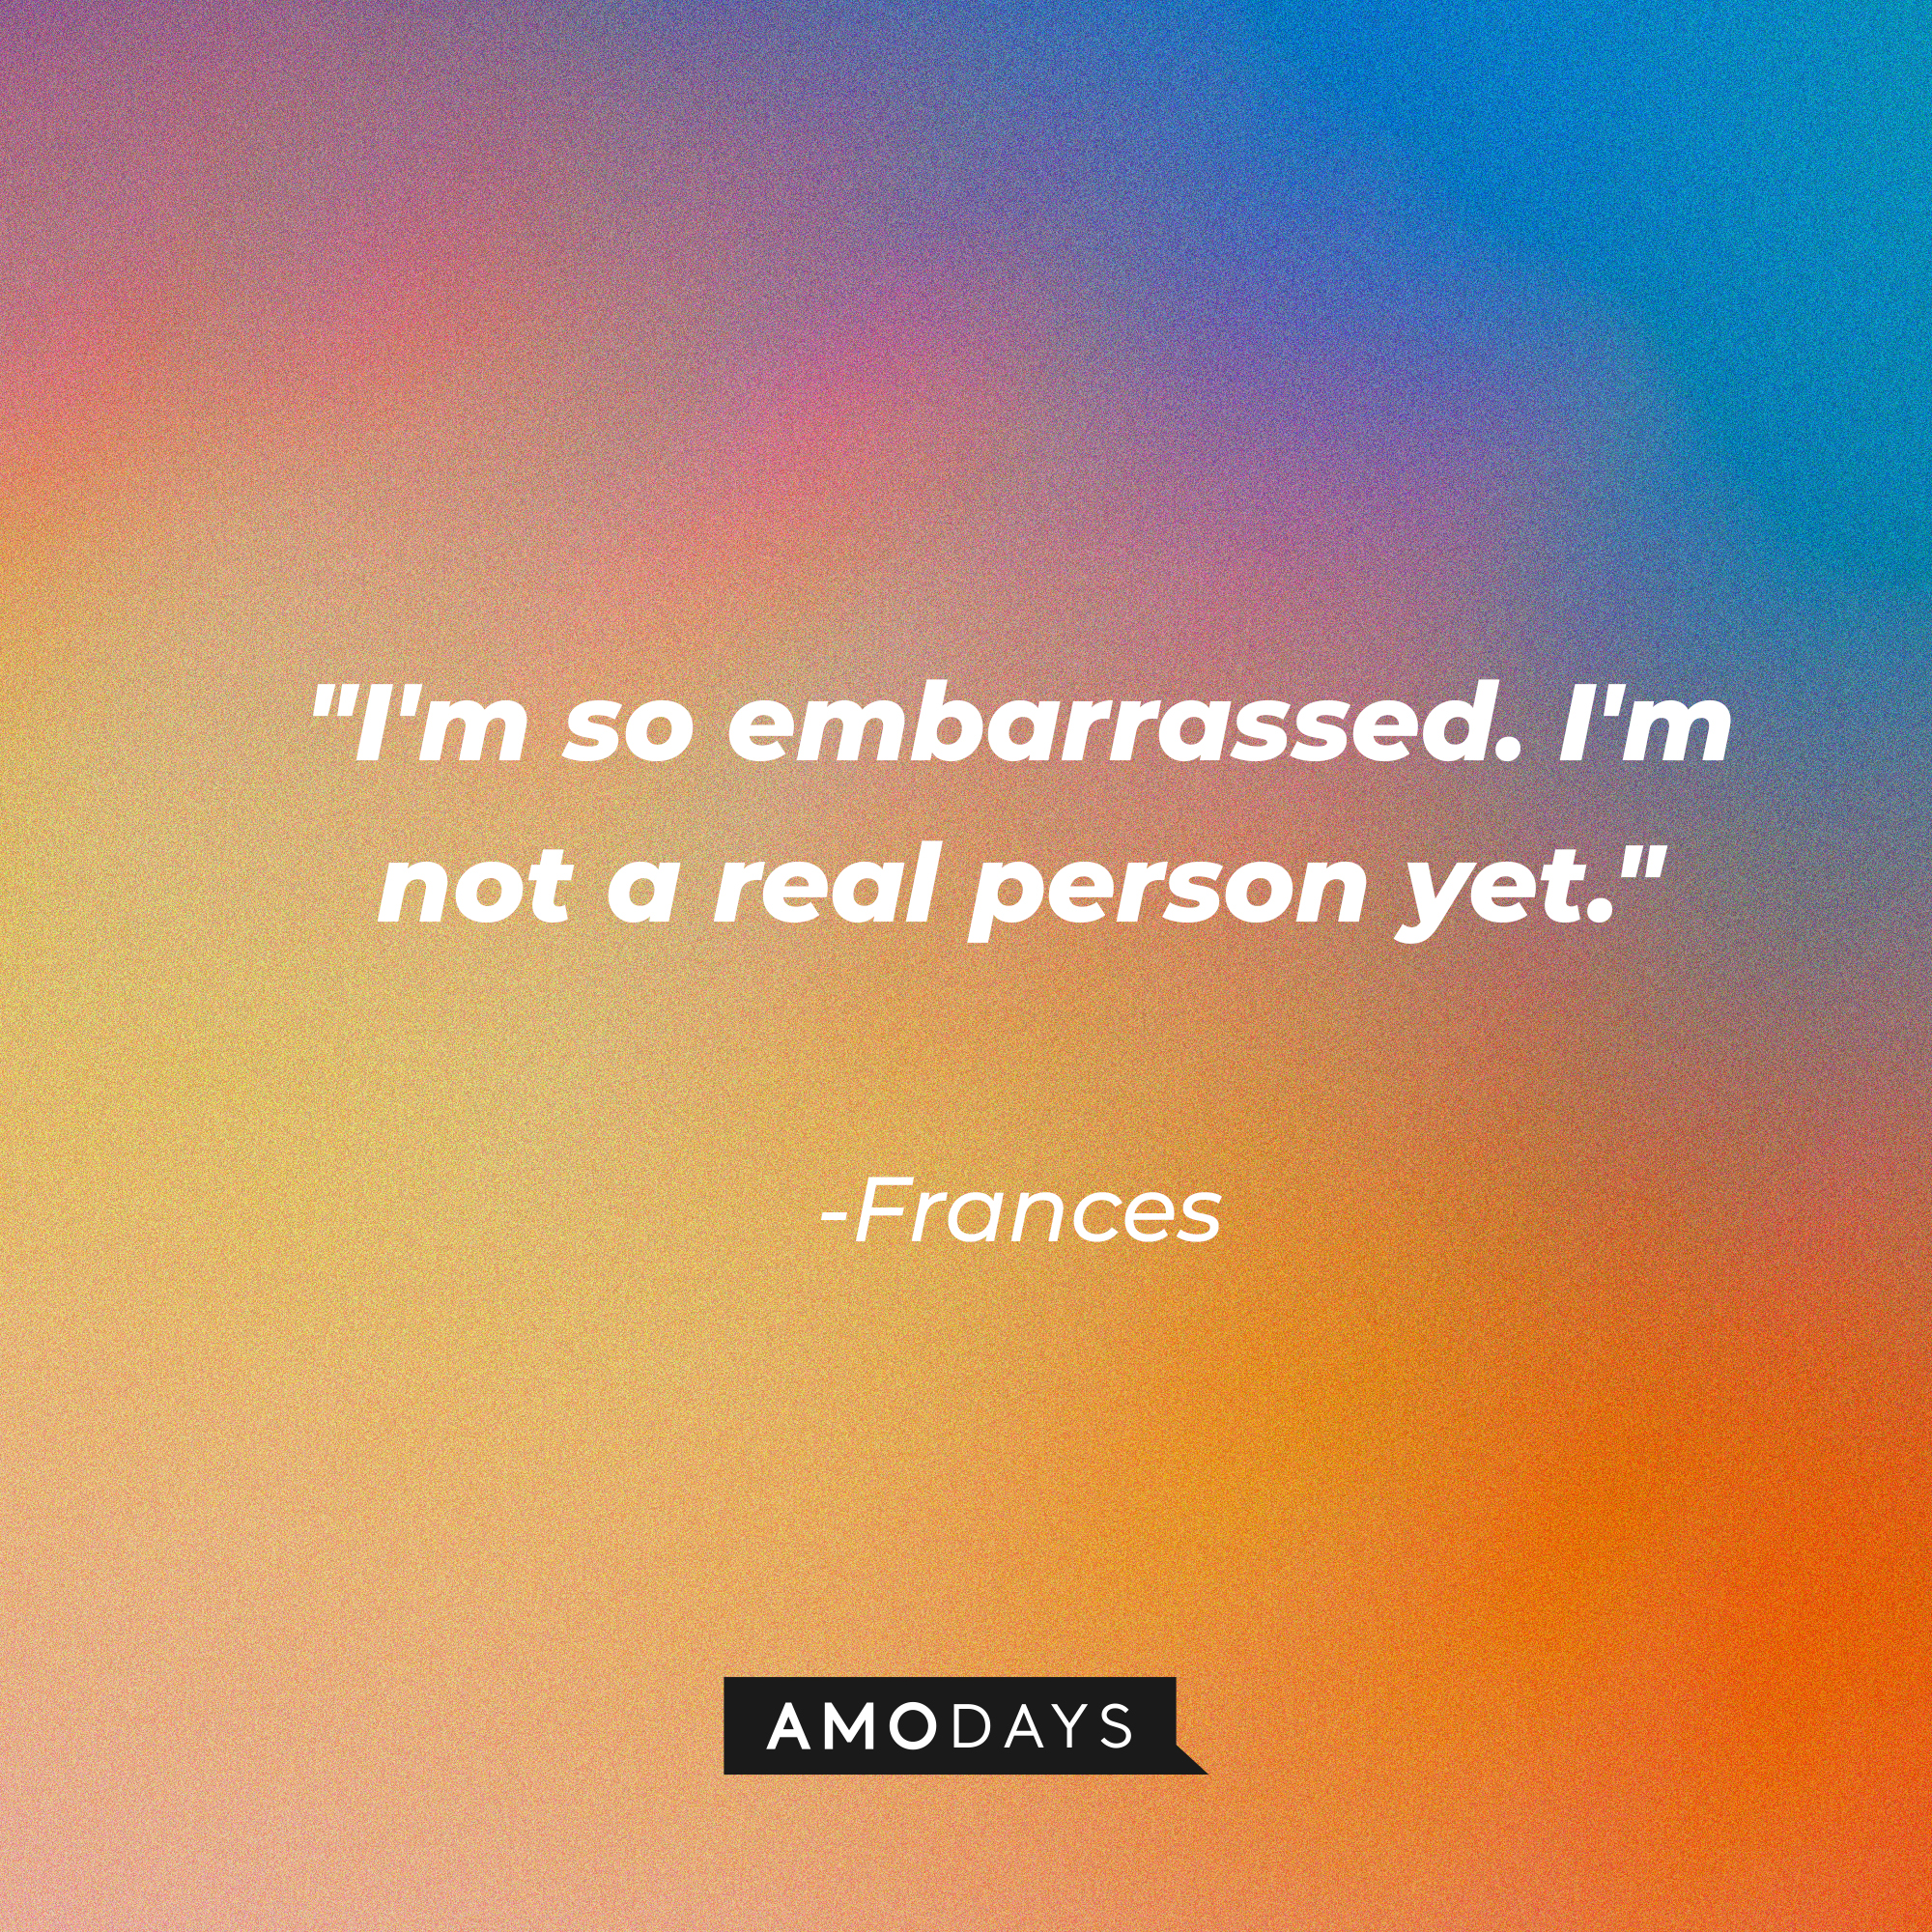 Frances' quote: "I'm so embarrassed. I'm not a real person yet." | Source: AmoDays